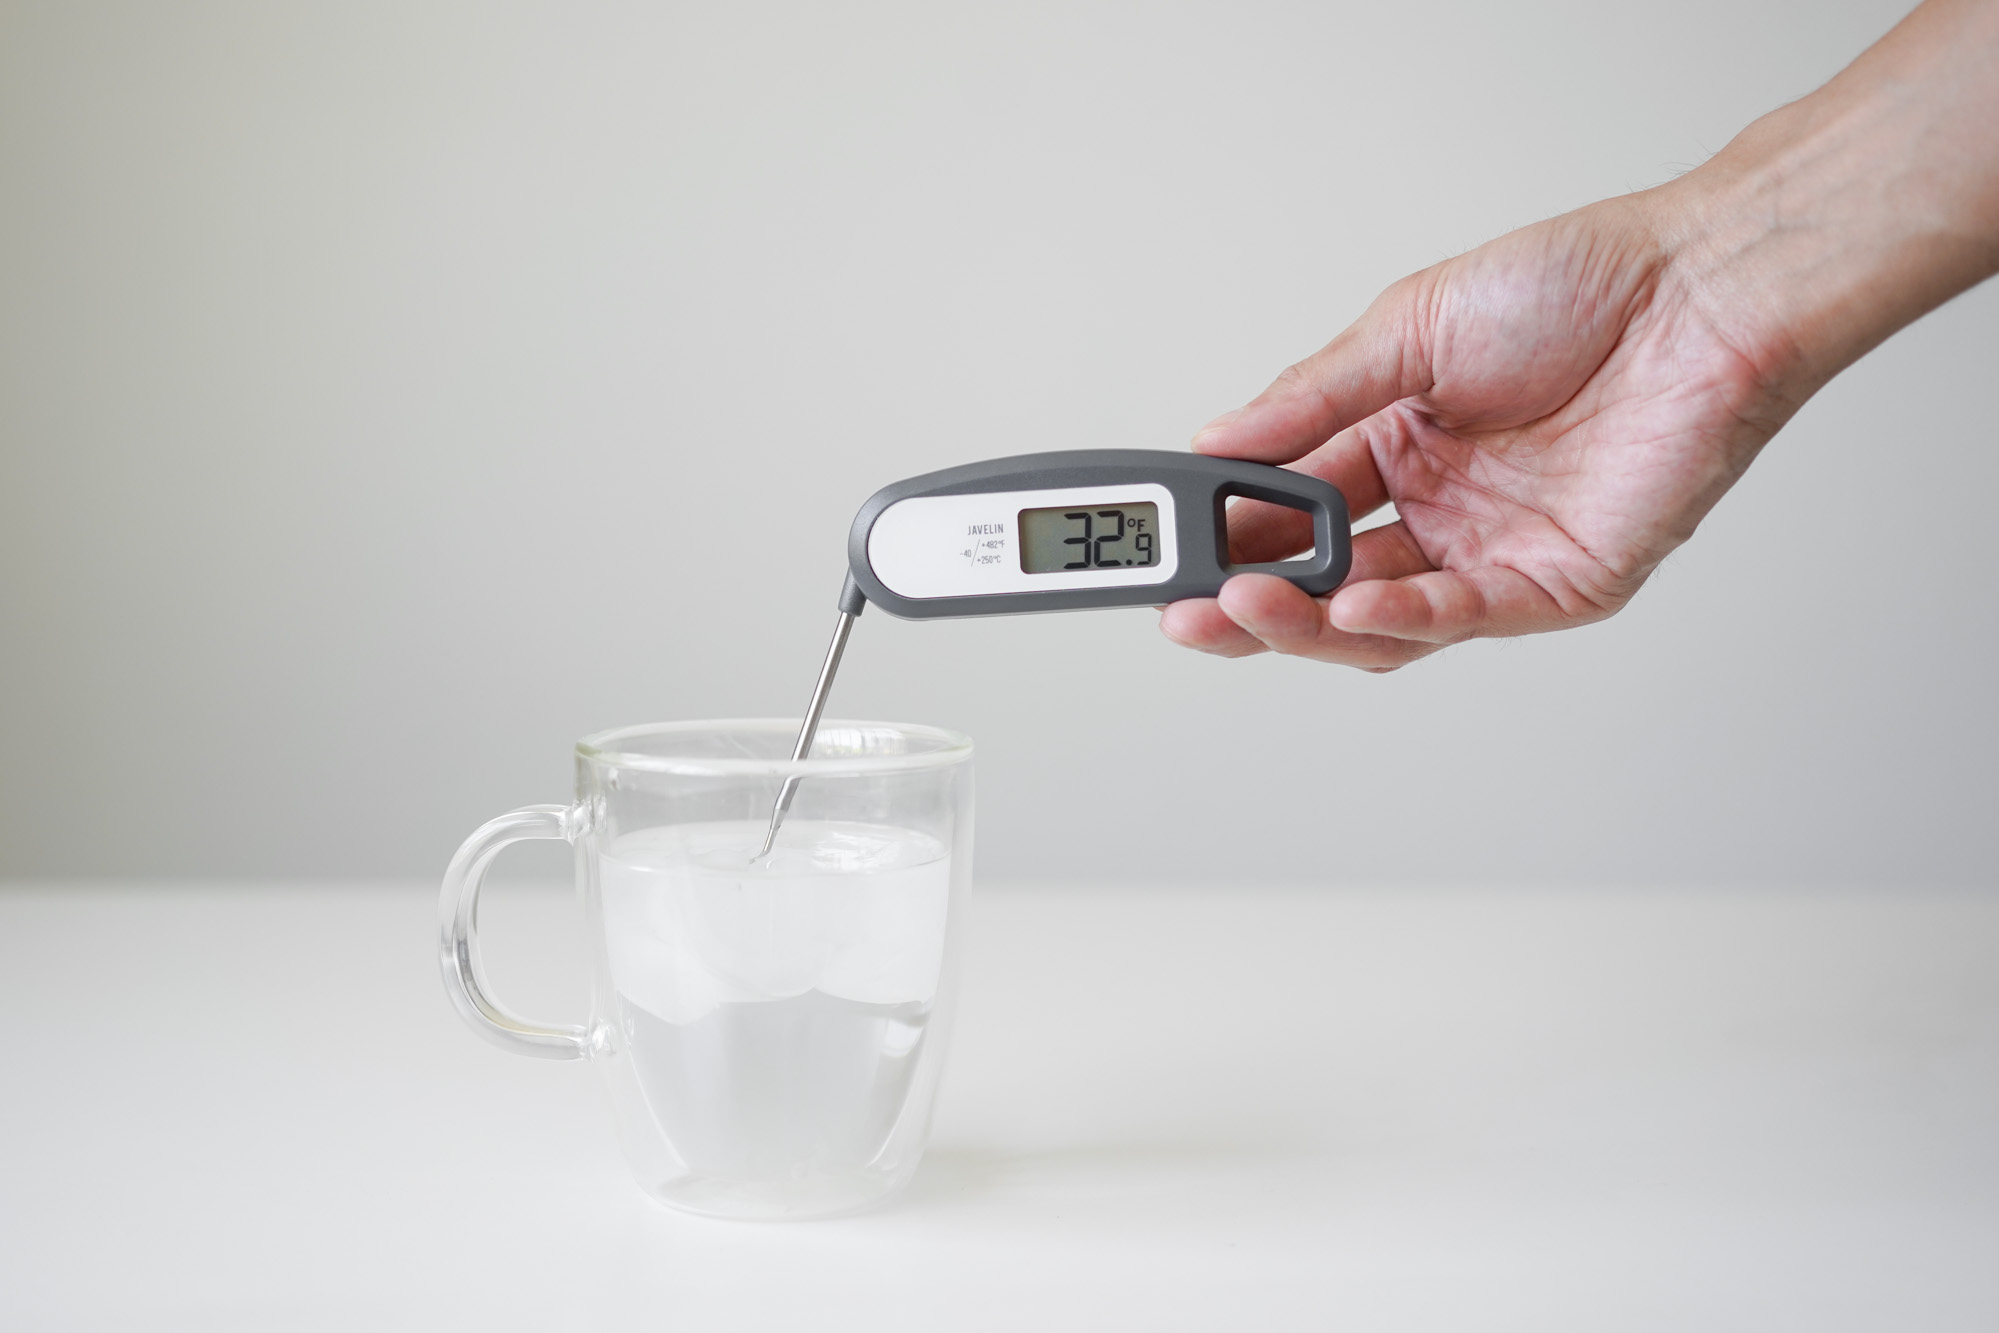 calibrating a thermometer in iced water